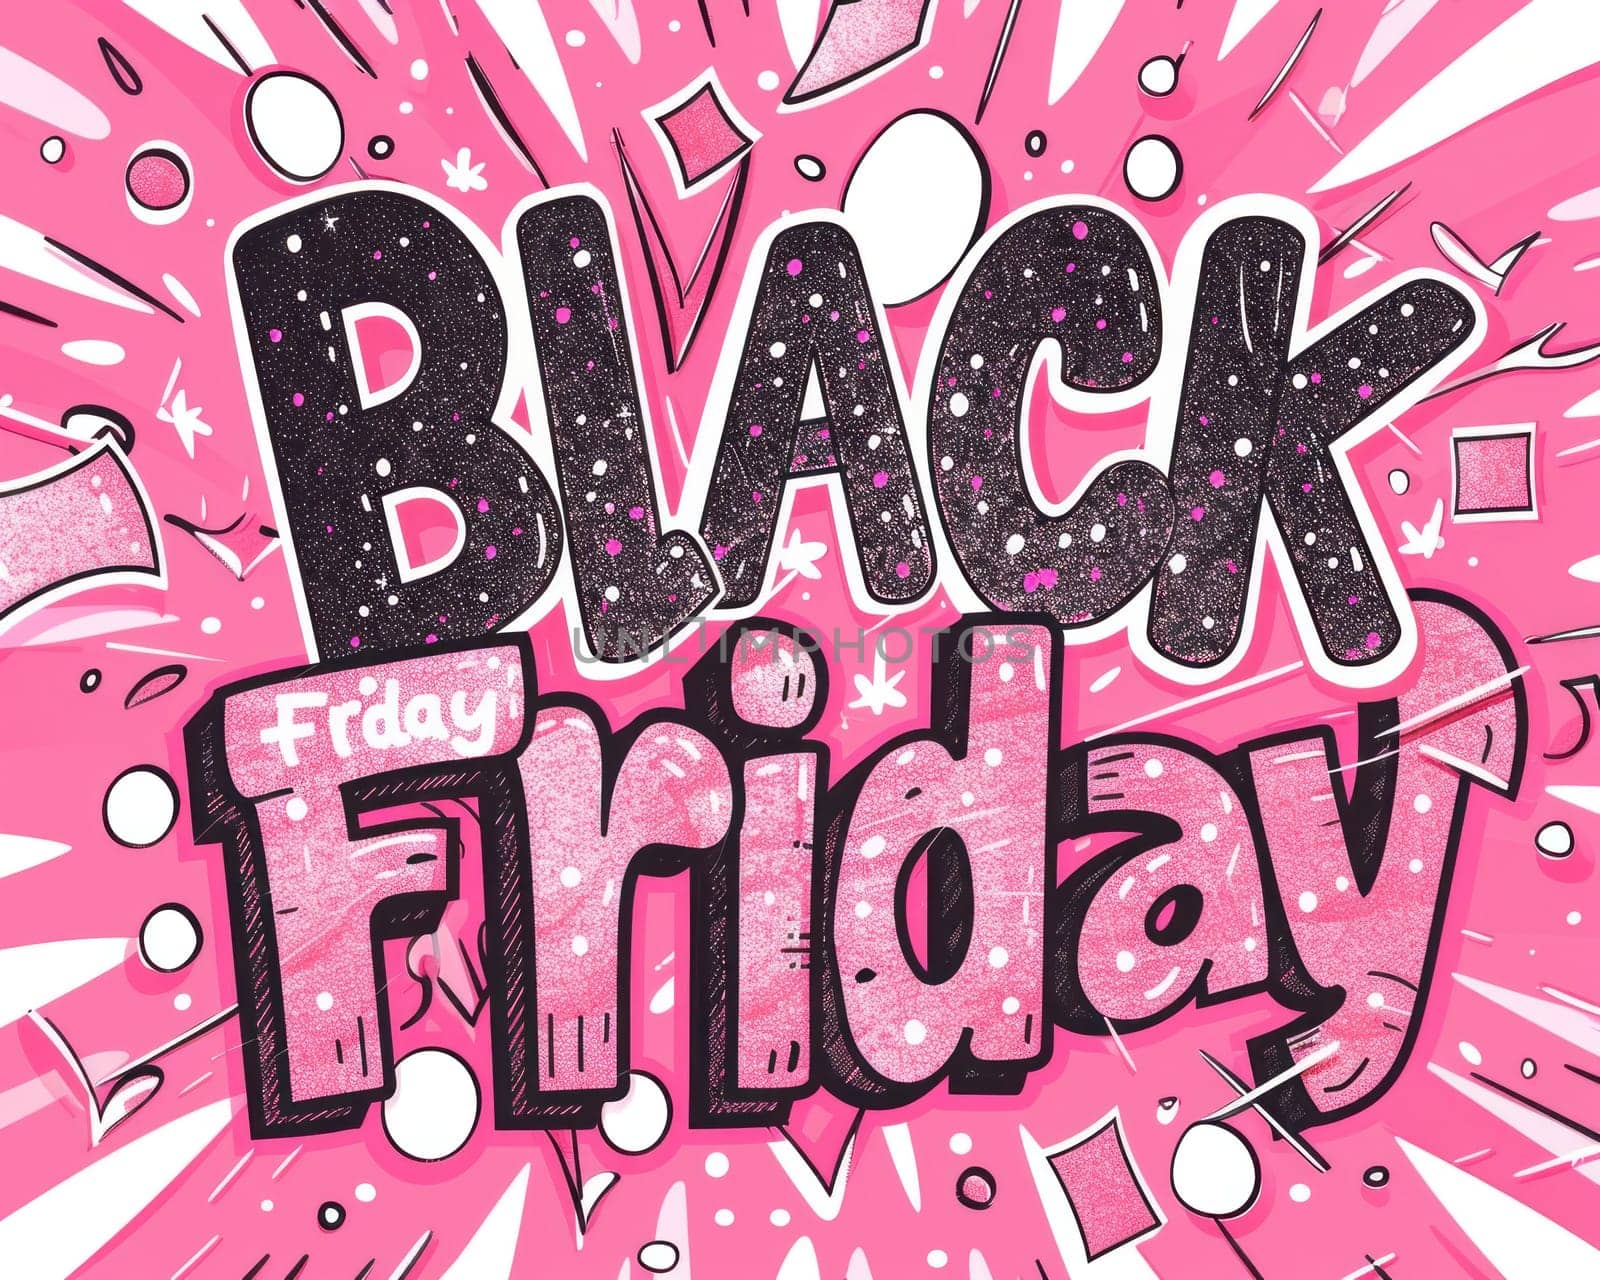 Black friday sale poster featuring bold black lettering on a soft pink background